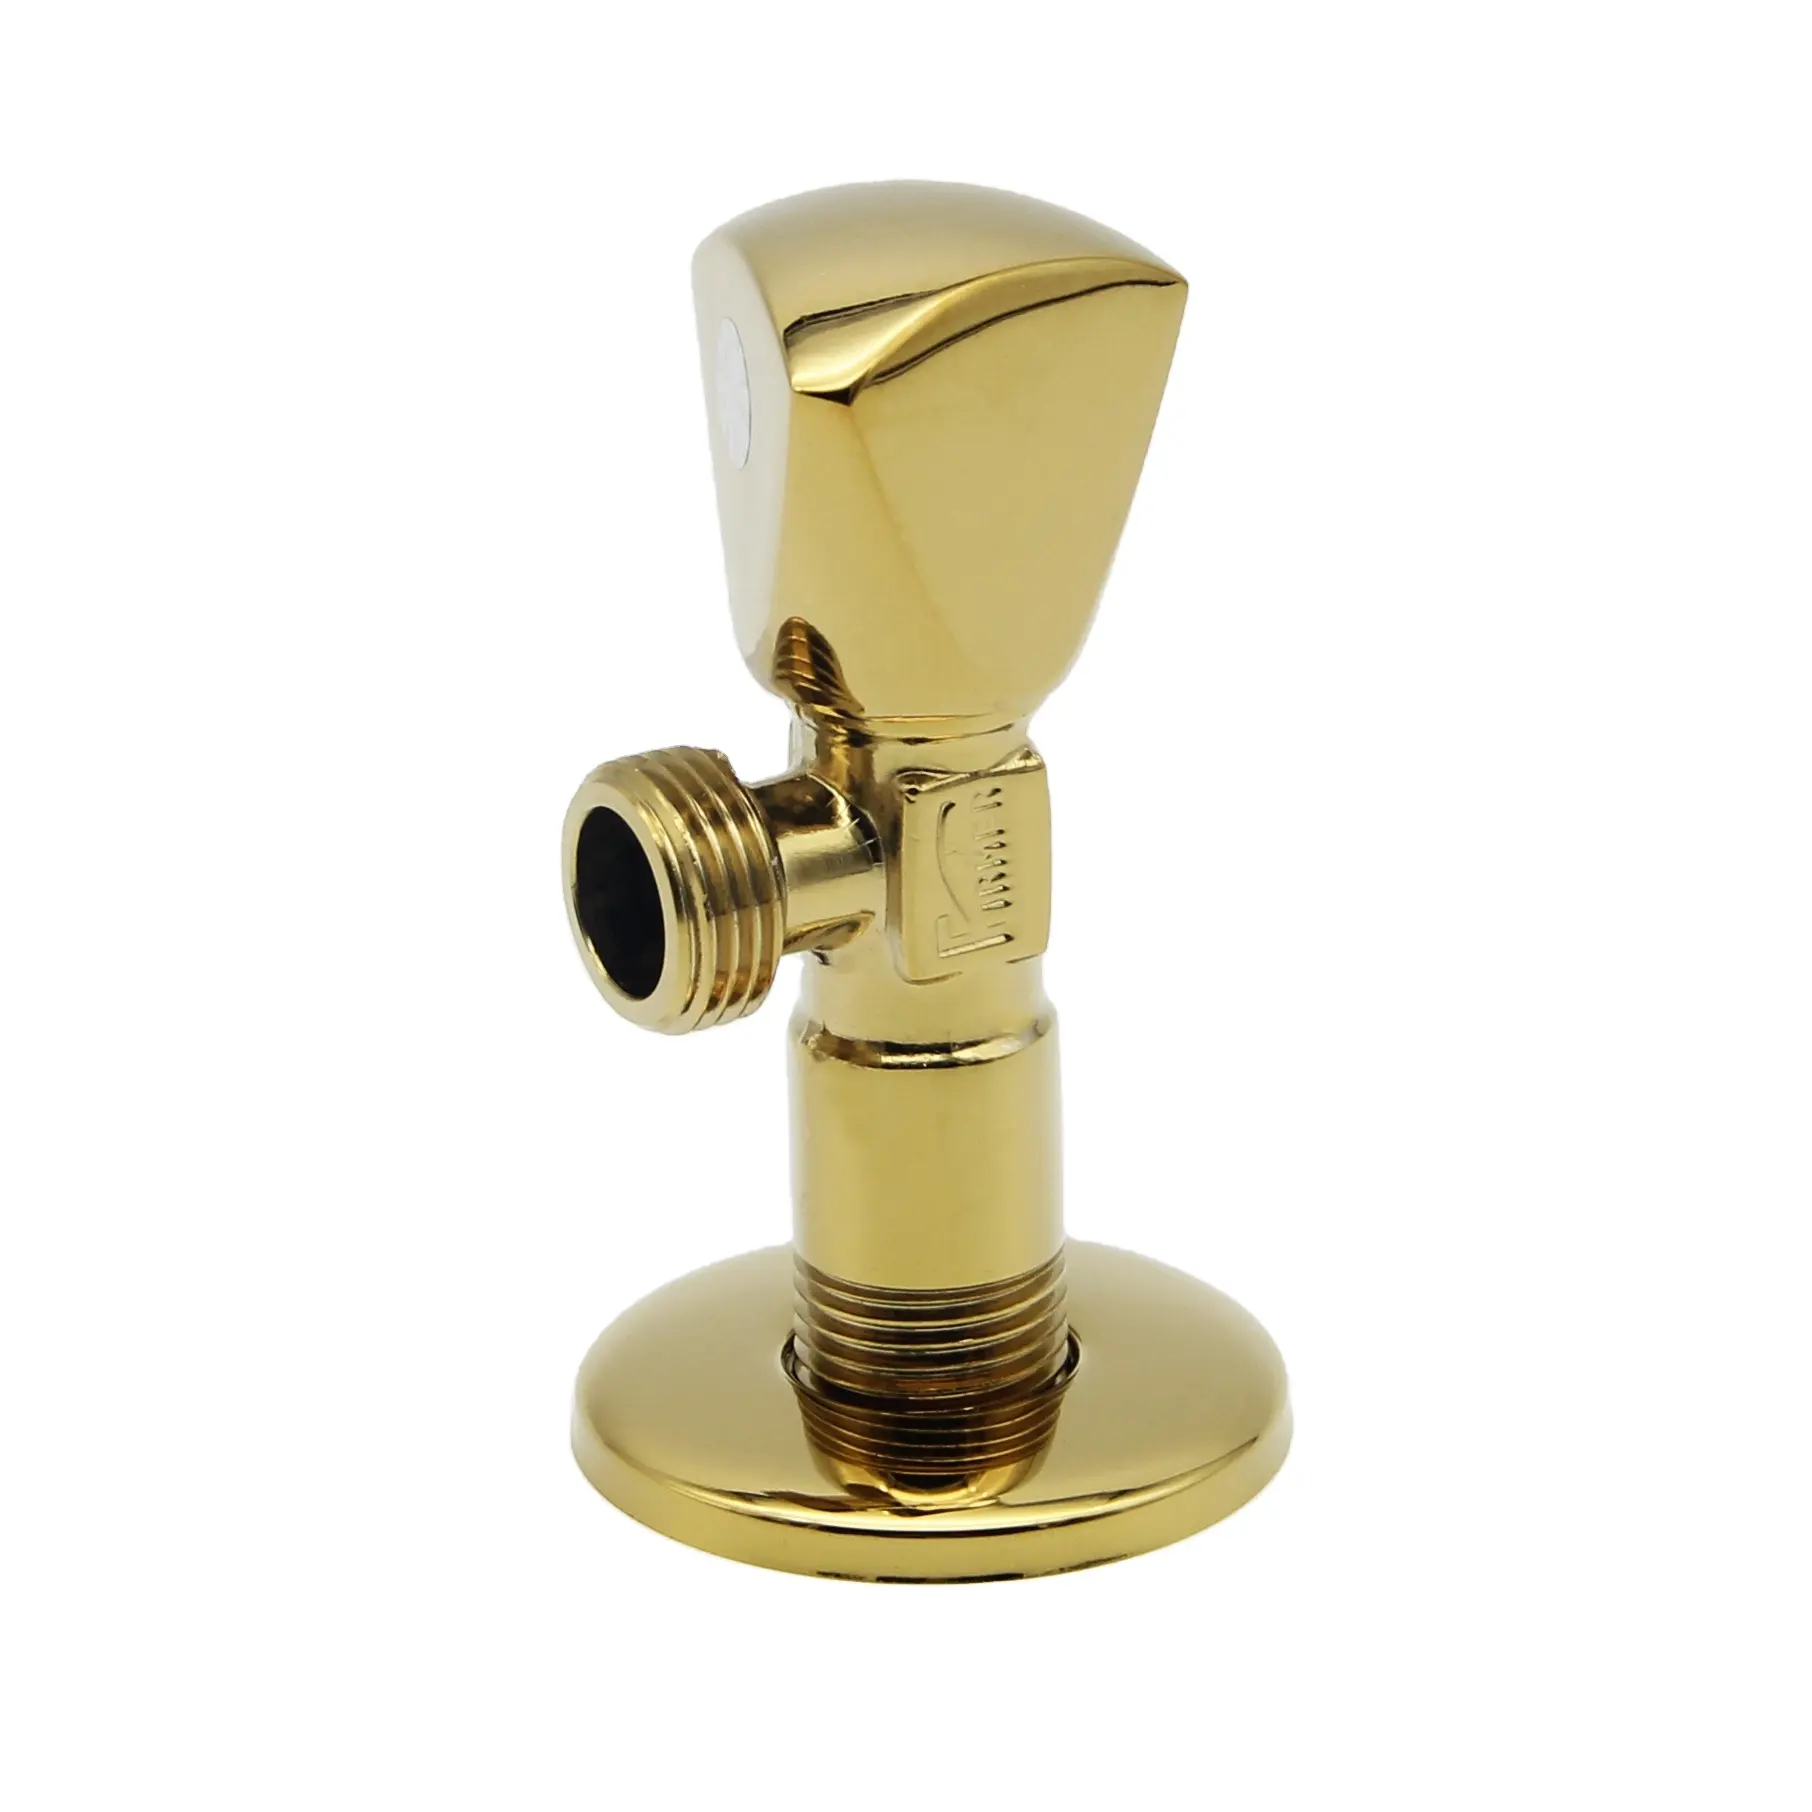 FIRMER Hot sell bathroom kitchen faucet accessories water control brass gold color angle valve